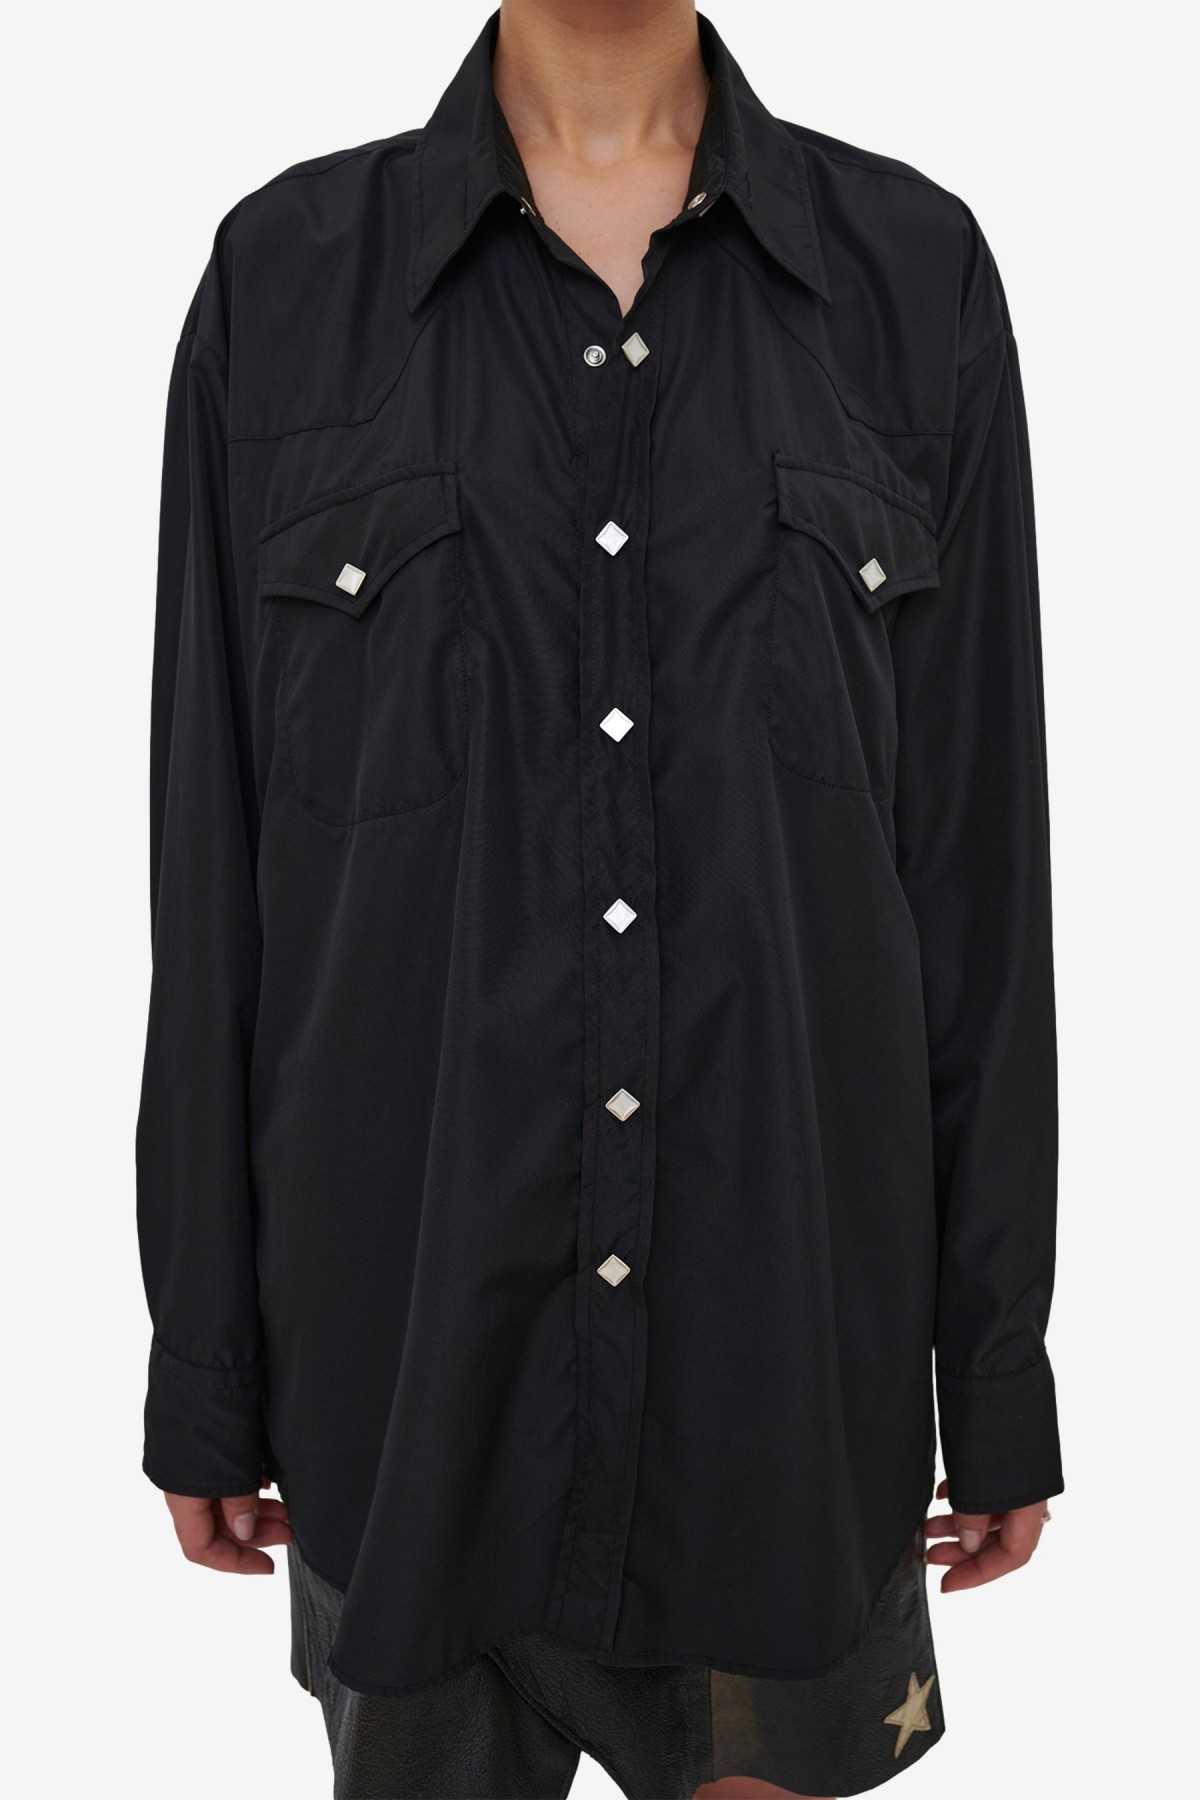 Our Legacy Ranch Shirt in Black Dull Luster